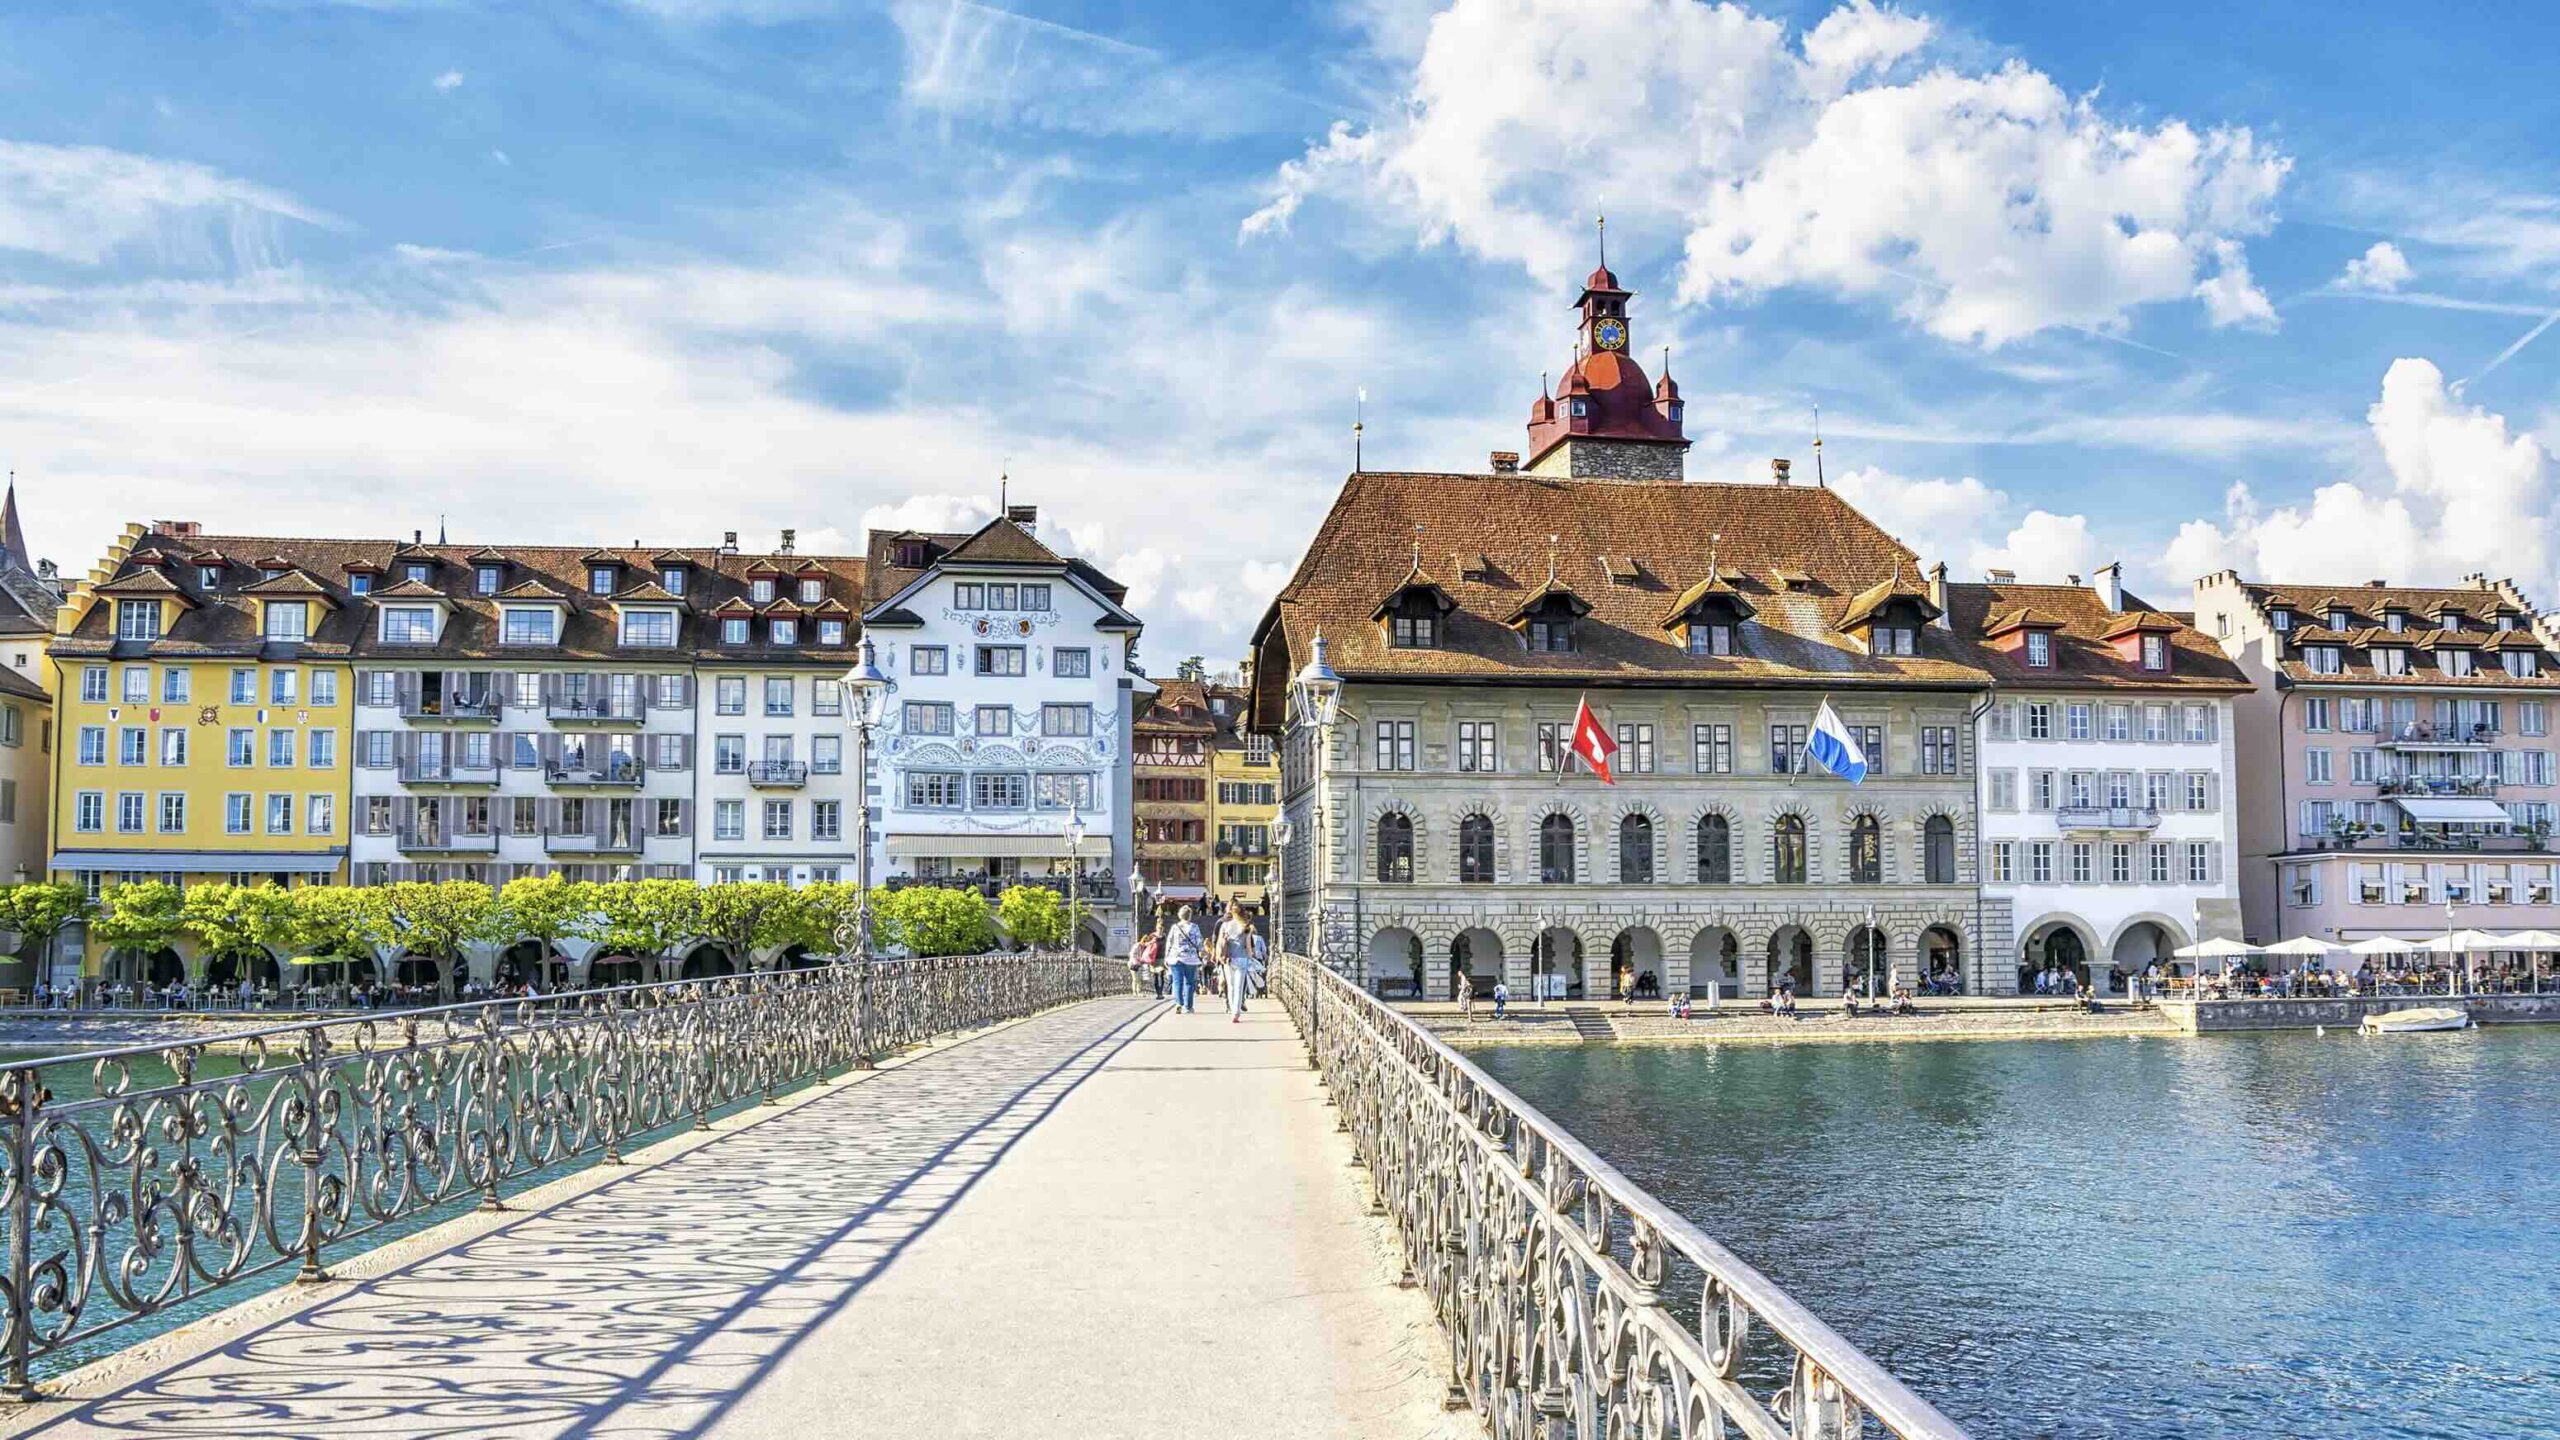 View on the beautiful picturesque historic buildings with cafe and restaurants from Rathaussteg Bridge over Reuss River in Old Town Lucerne.